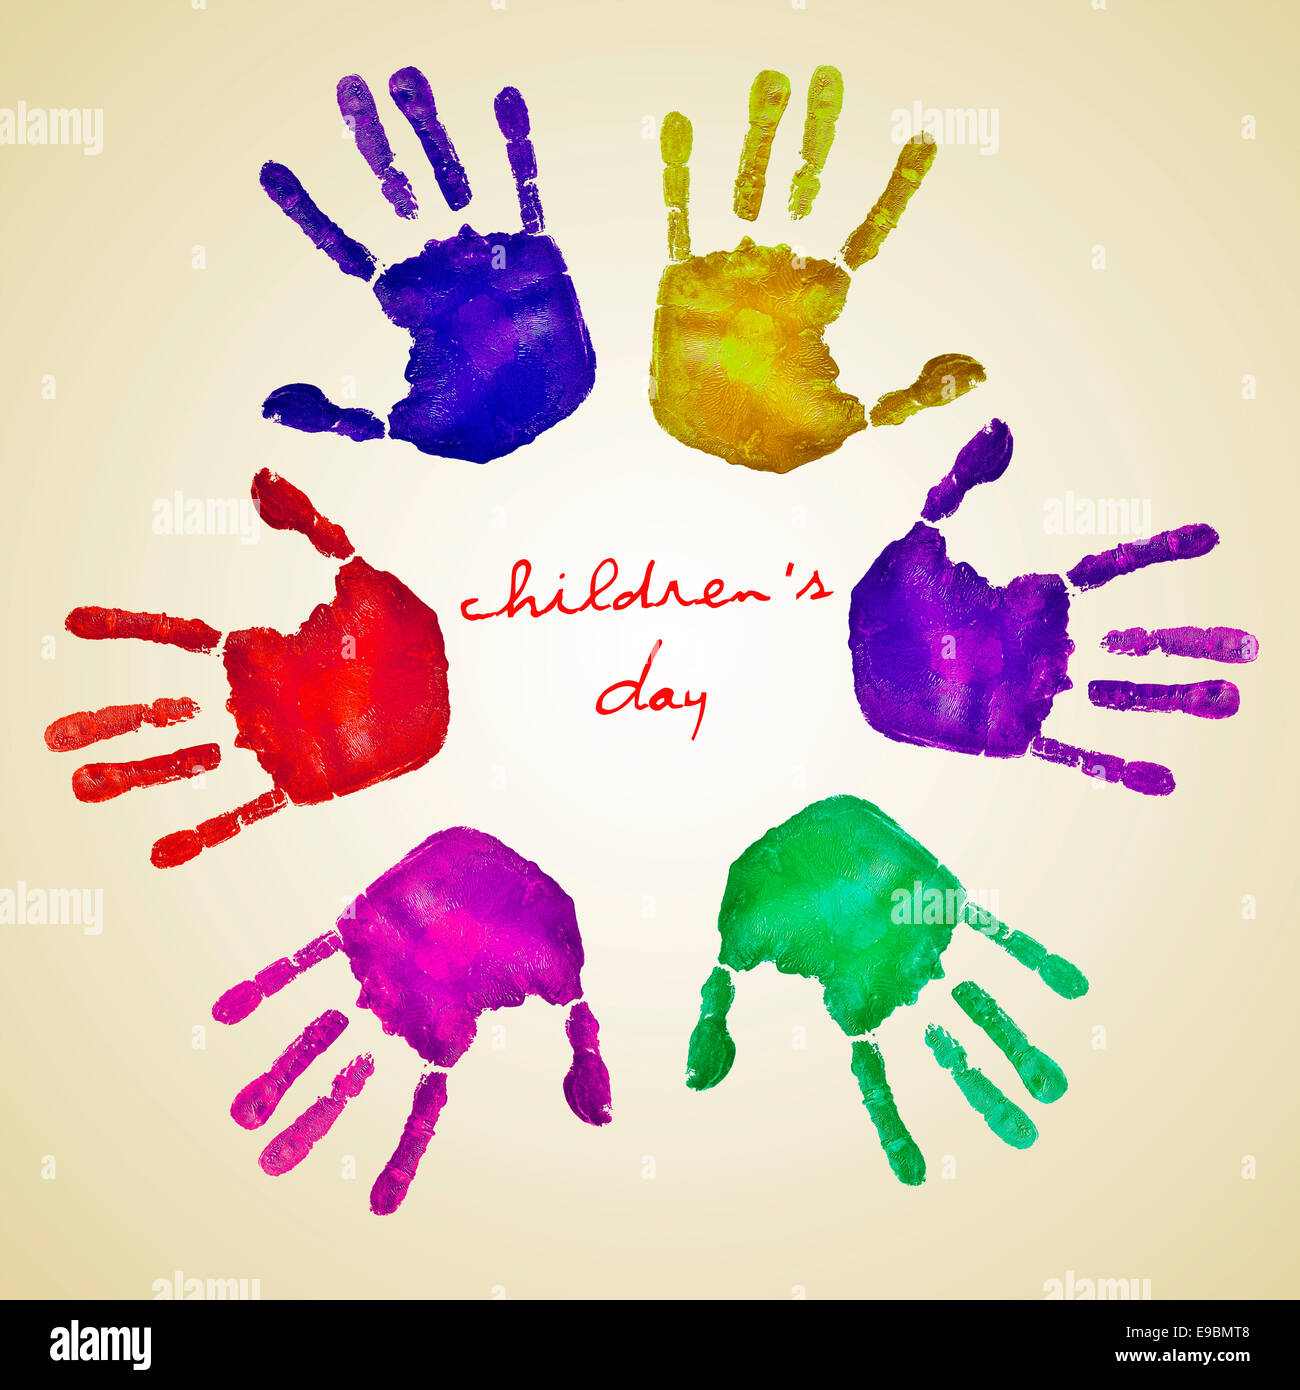 handprints of different colors forming a circle and the text childrens day written in the center on a beige background Stock Photo